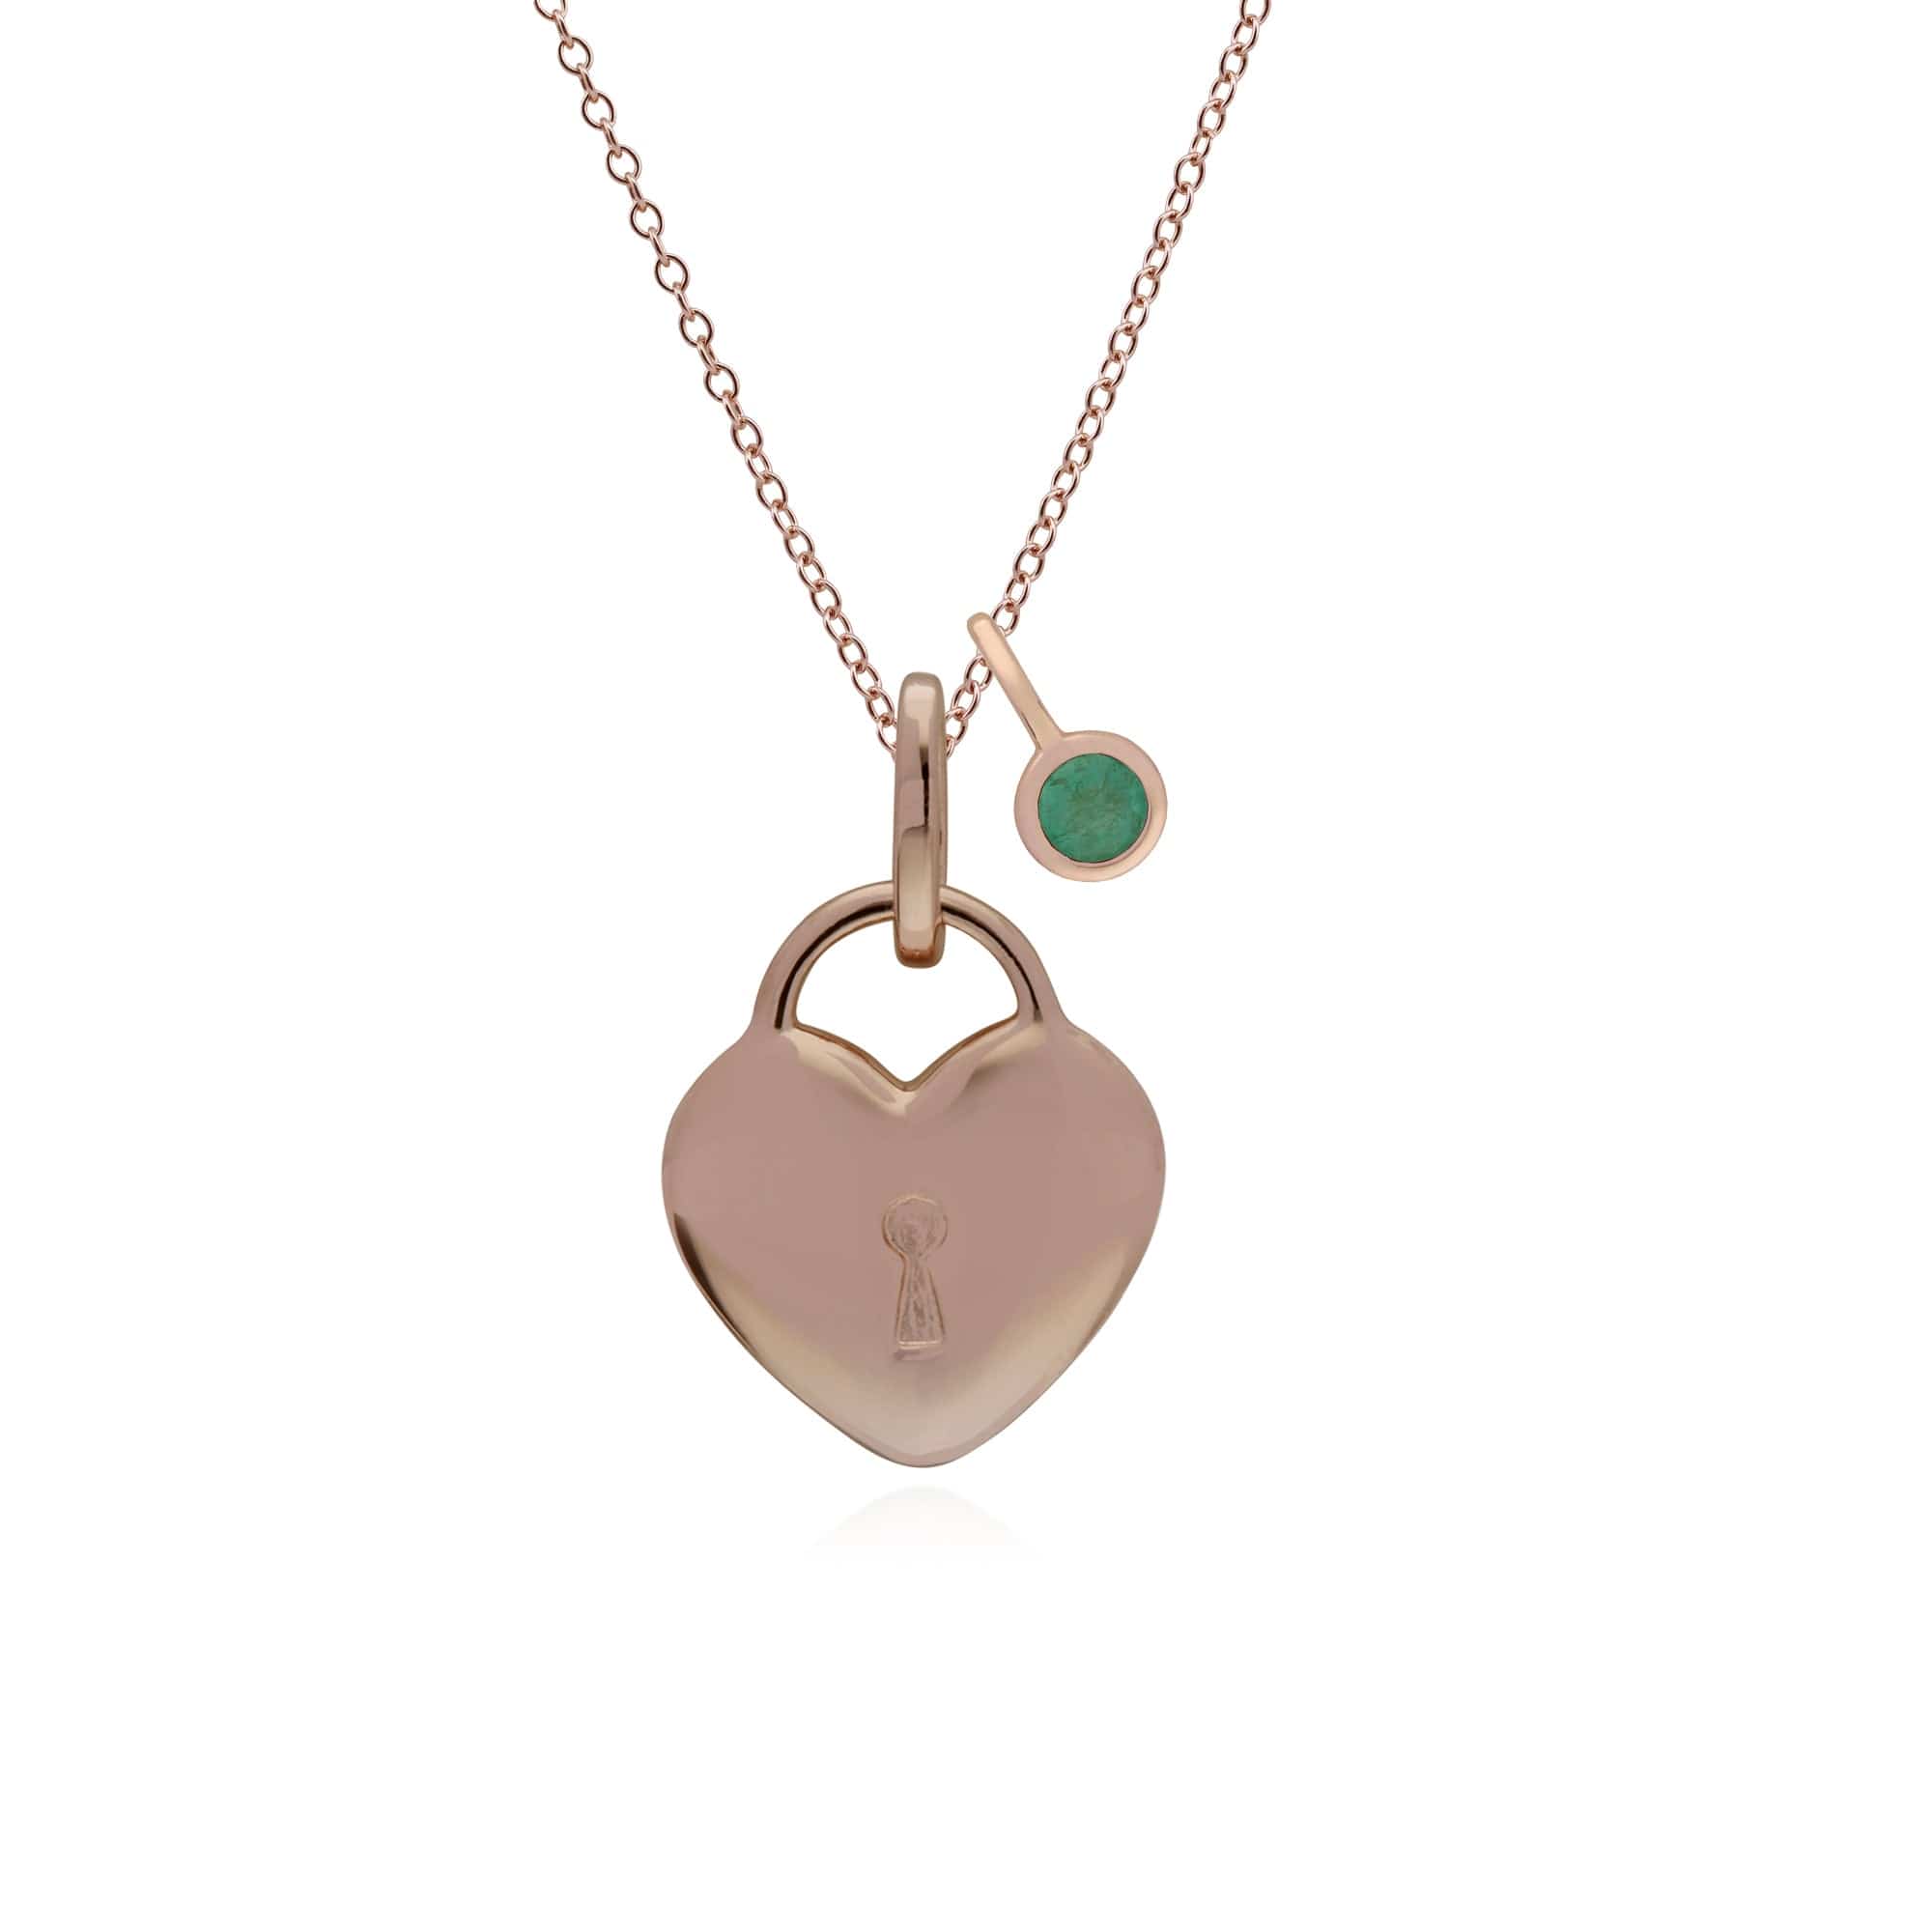 270P027302925-270P026901925 Classic Heart Lock Pendant & Emerald Charm in Rose Gold Plated 925 Sterling Silver 1